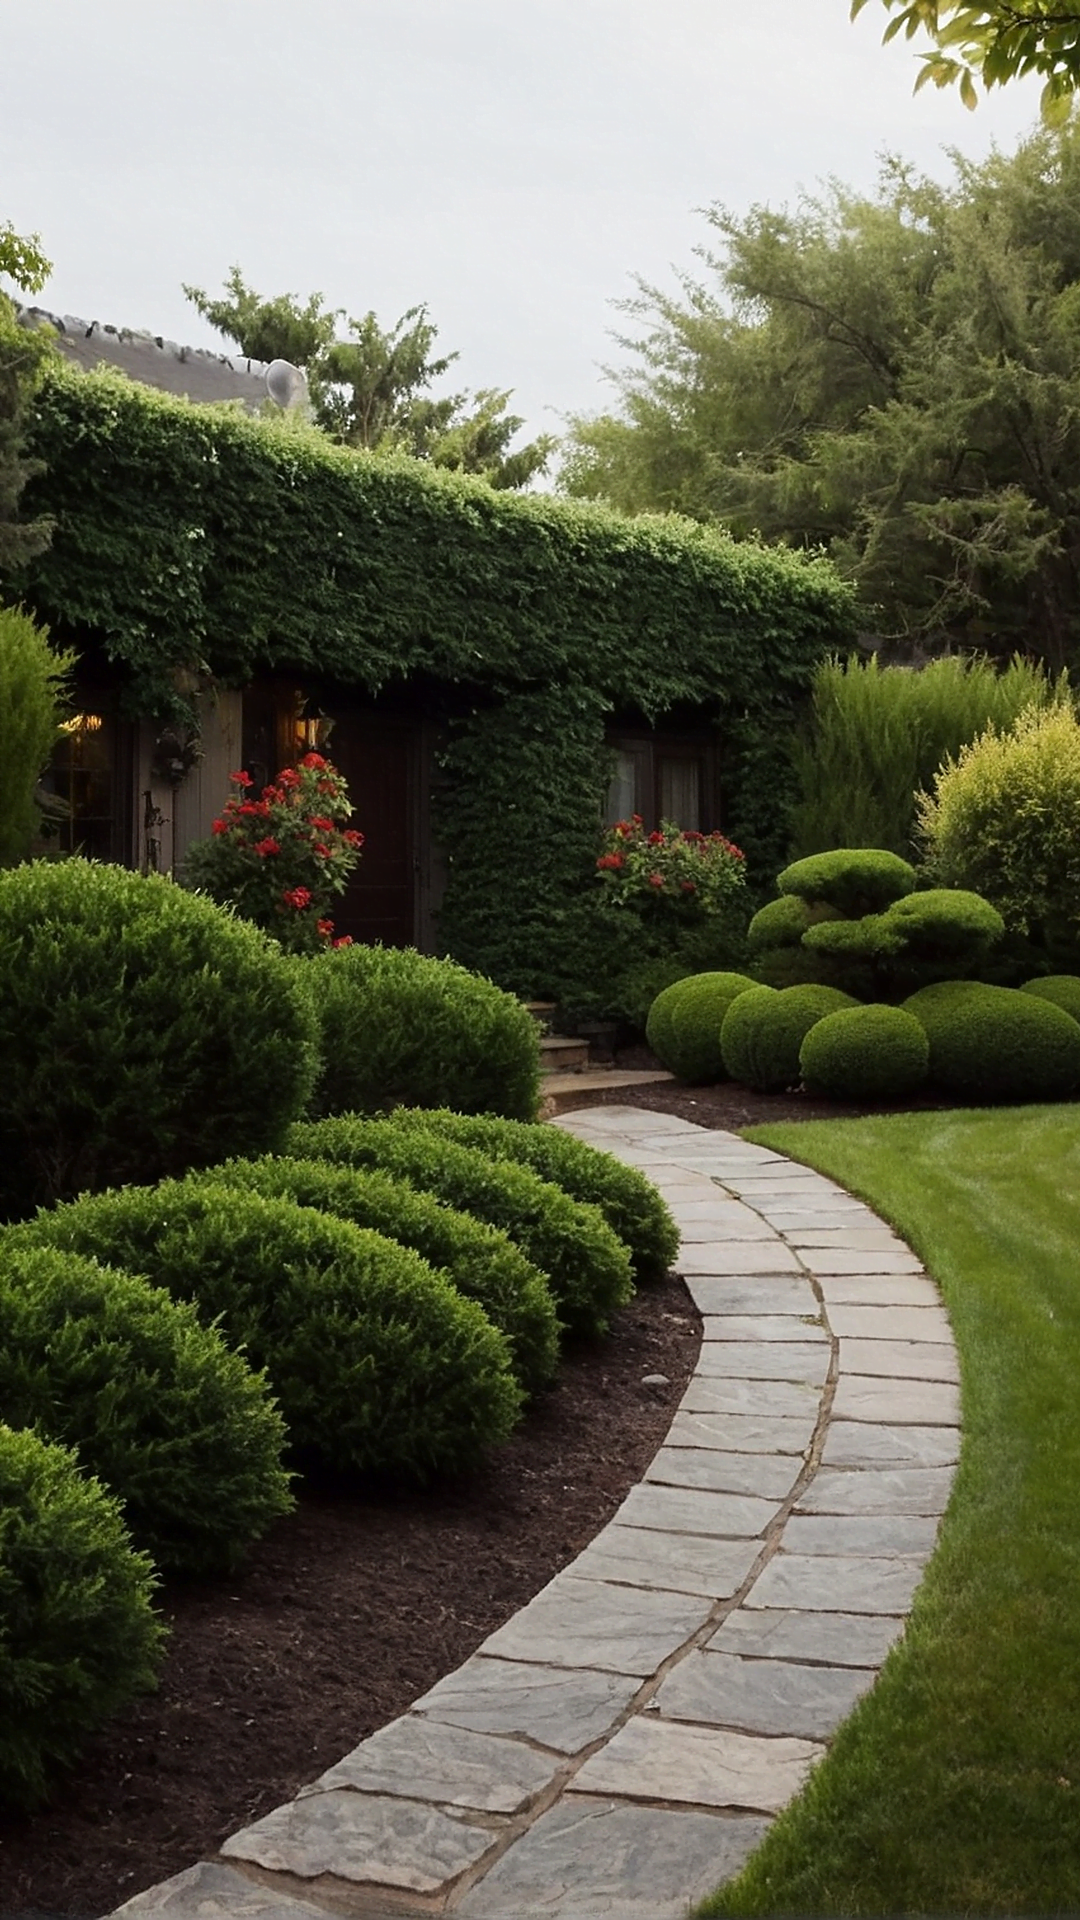 Bridging Beauty: Connecting House and Landscape with Bushes